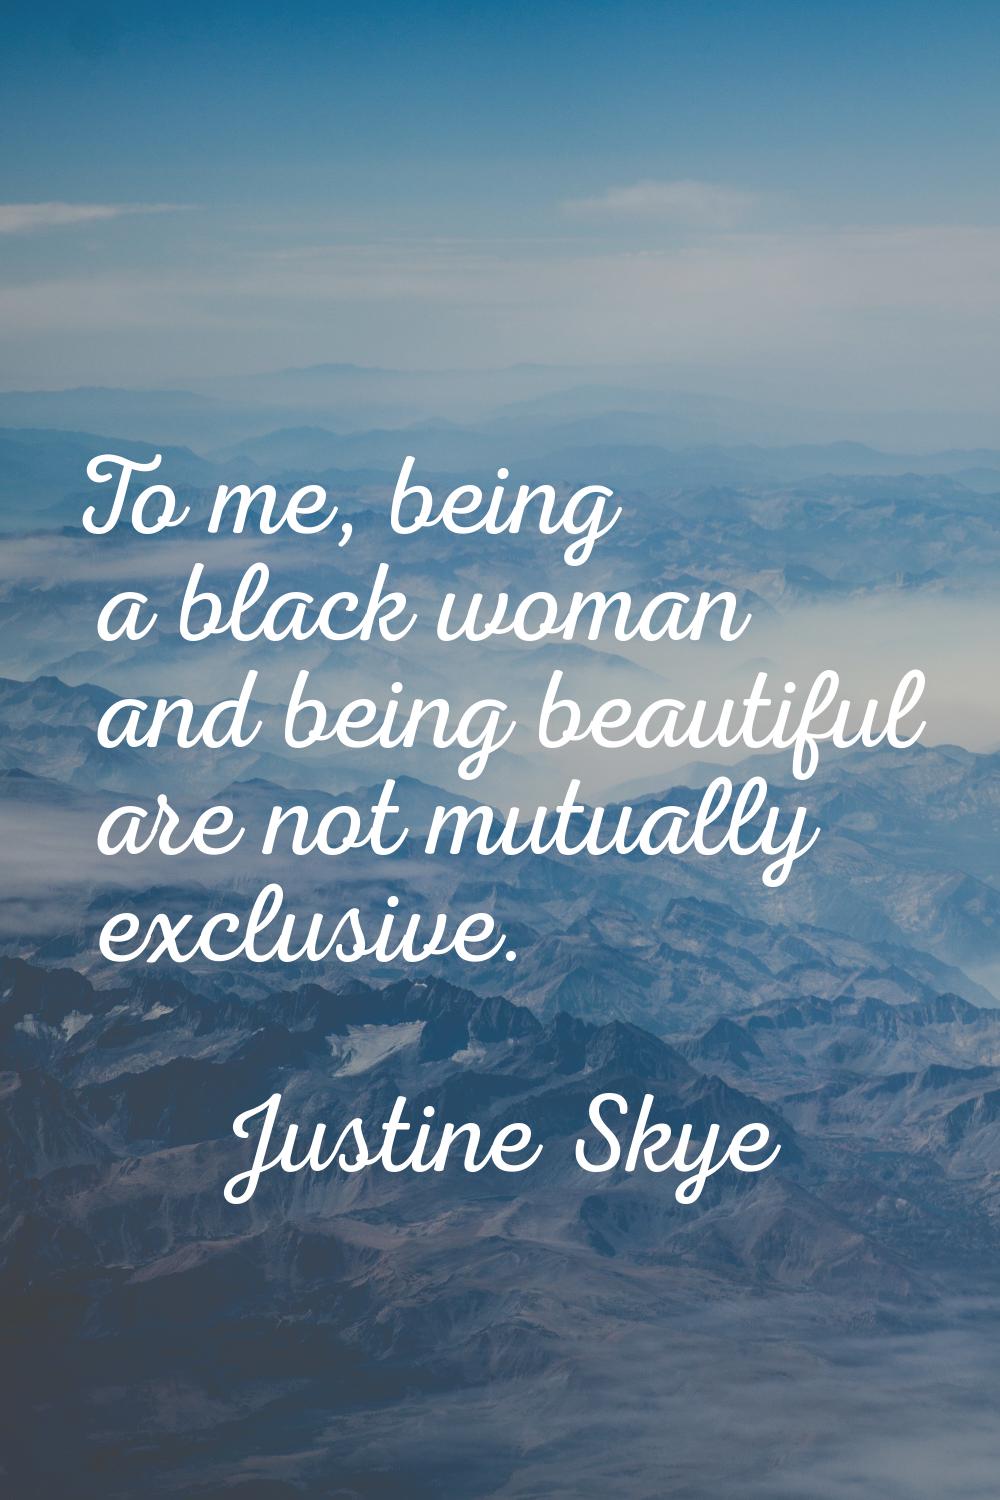 To me, being a black woman and being beautiful are not mutually exclusive.